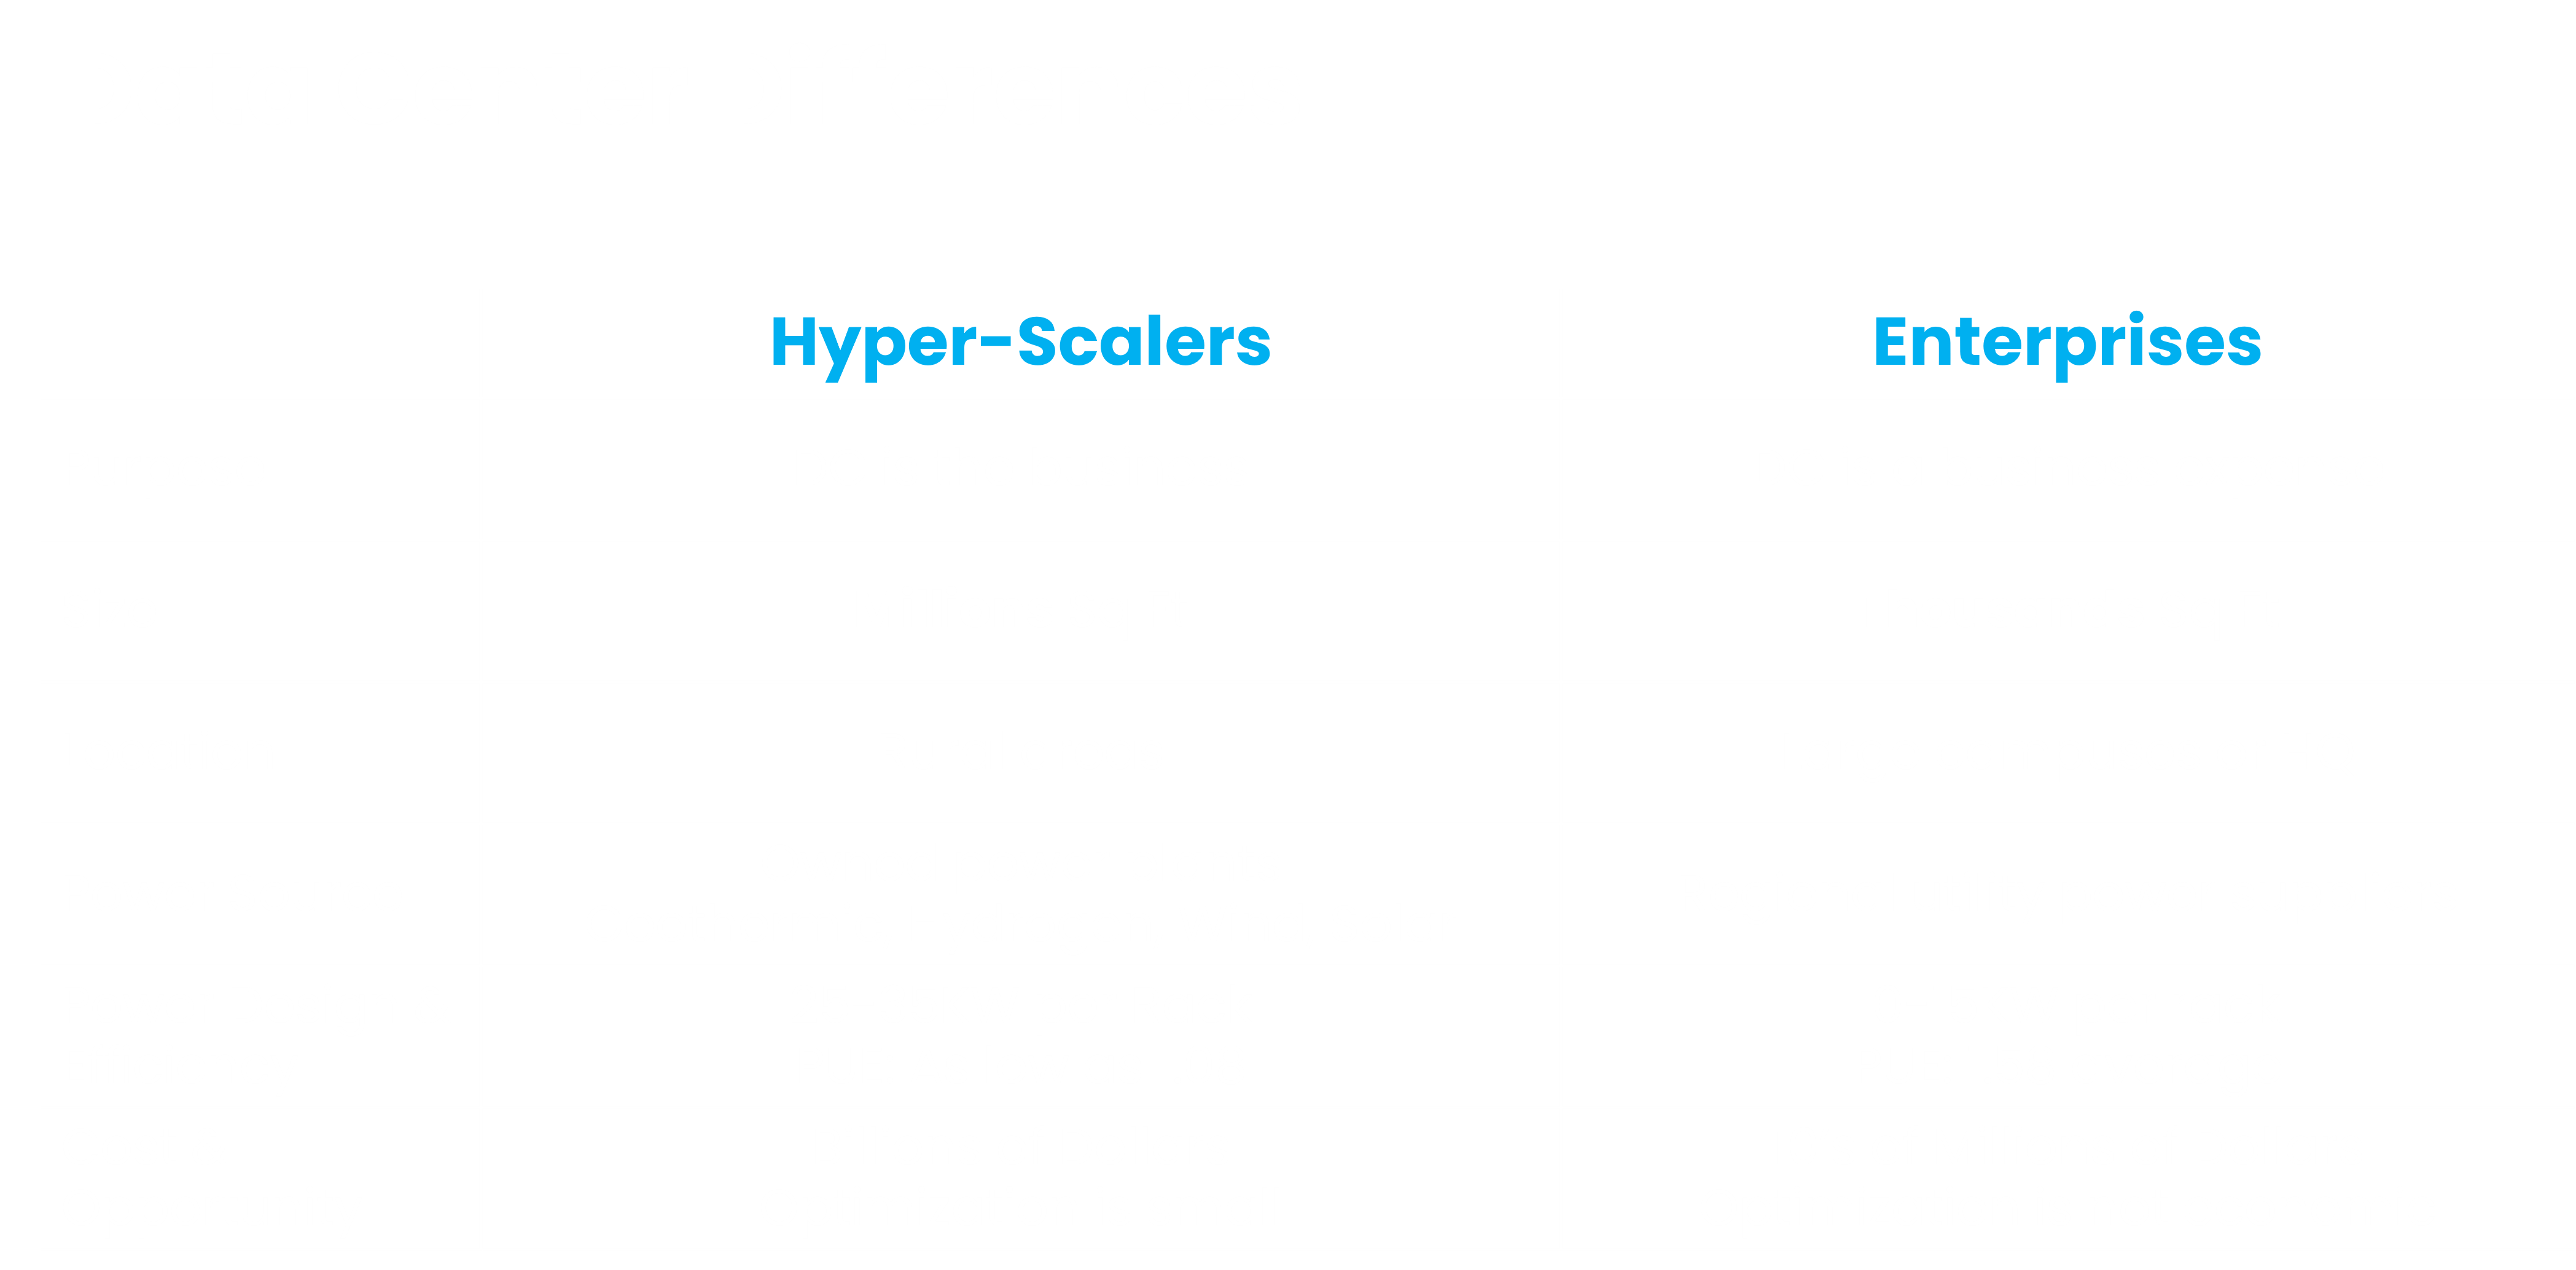 NeuReality shows big differences in AI Inference hardware and systems by highlight GPU, Energy, Location and Business Purpose differences between Hyper-Scalers versus Enterprise